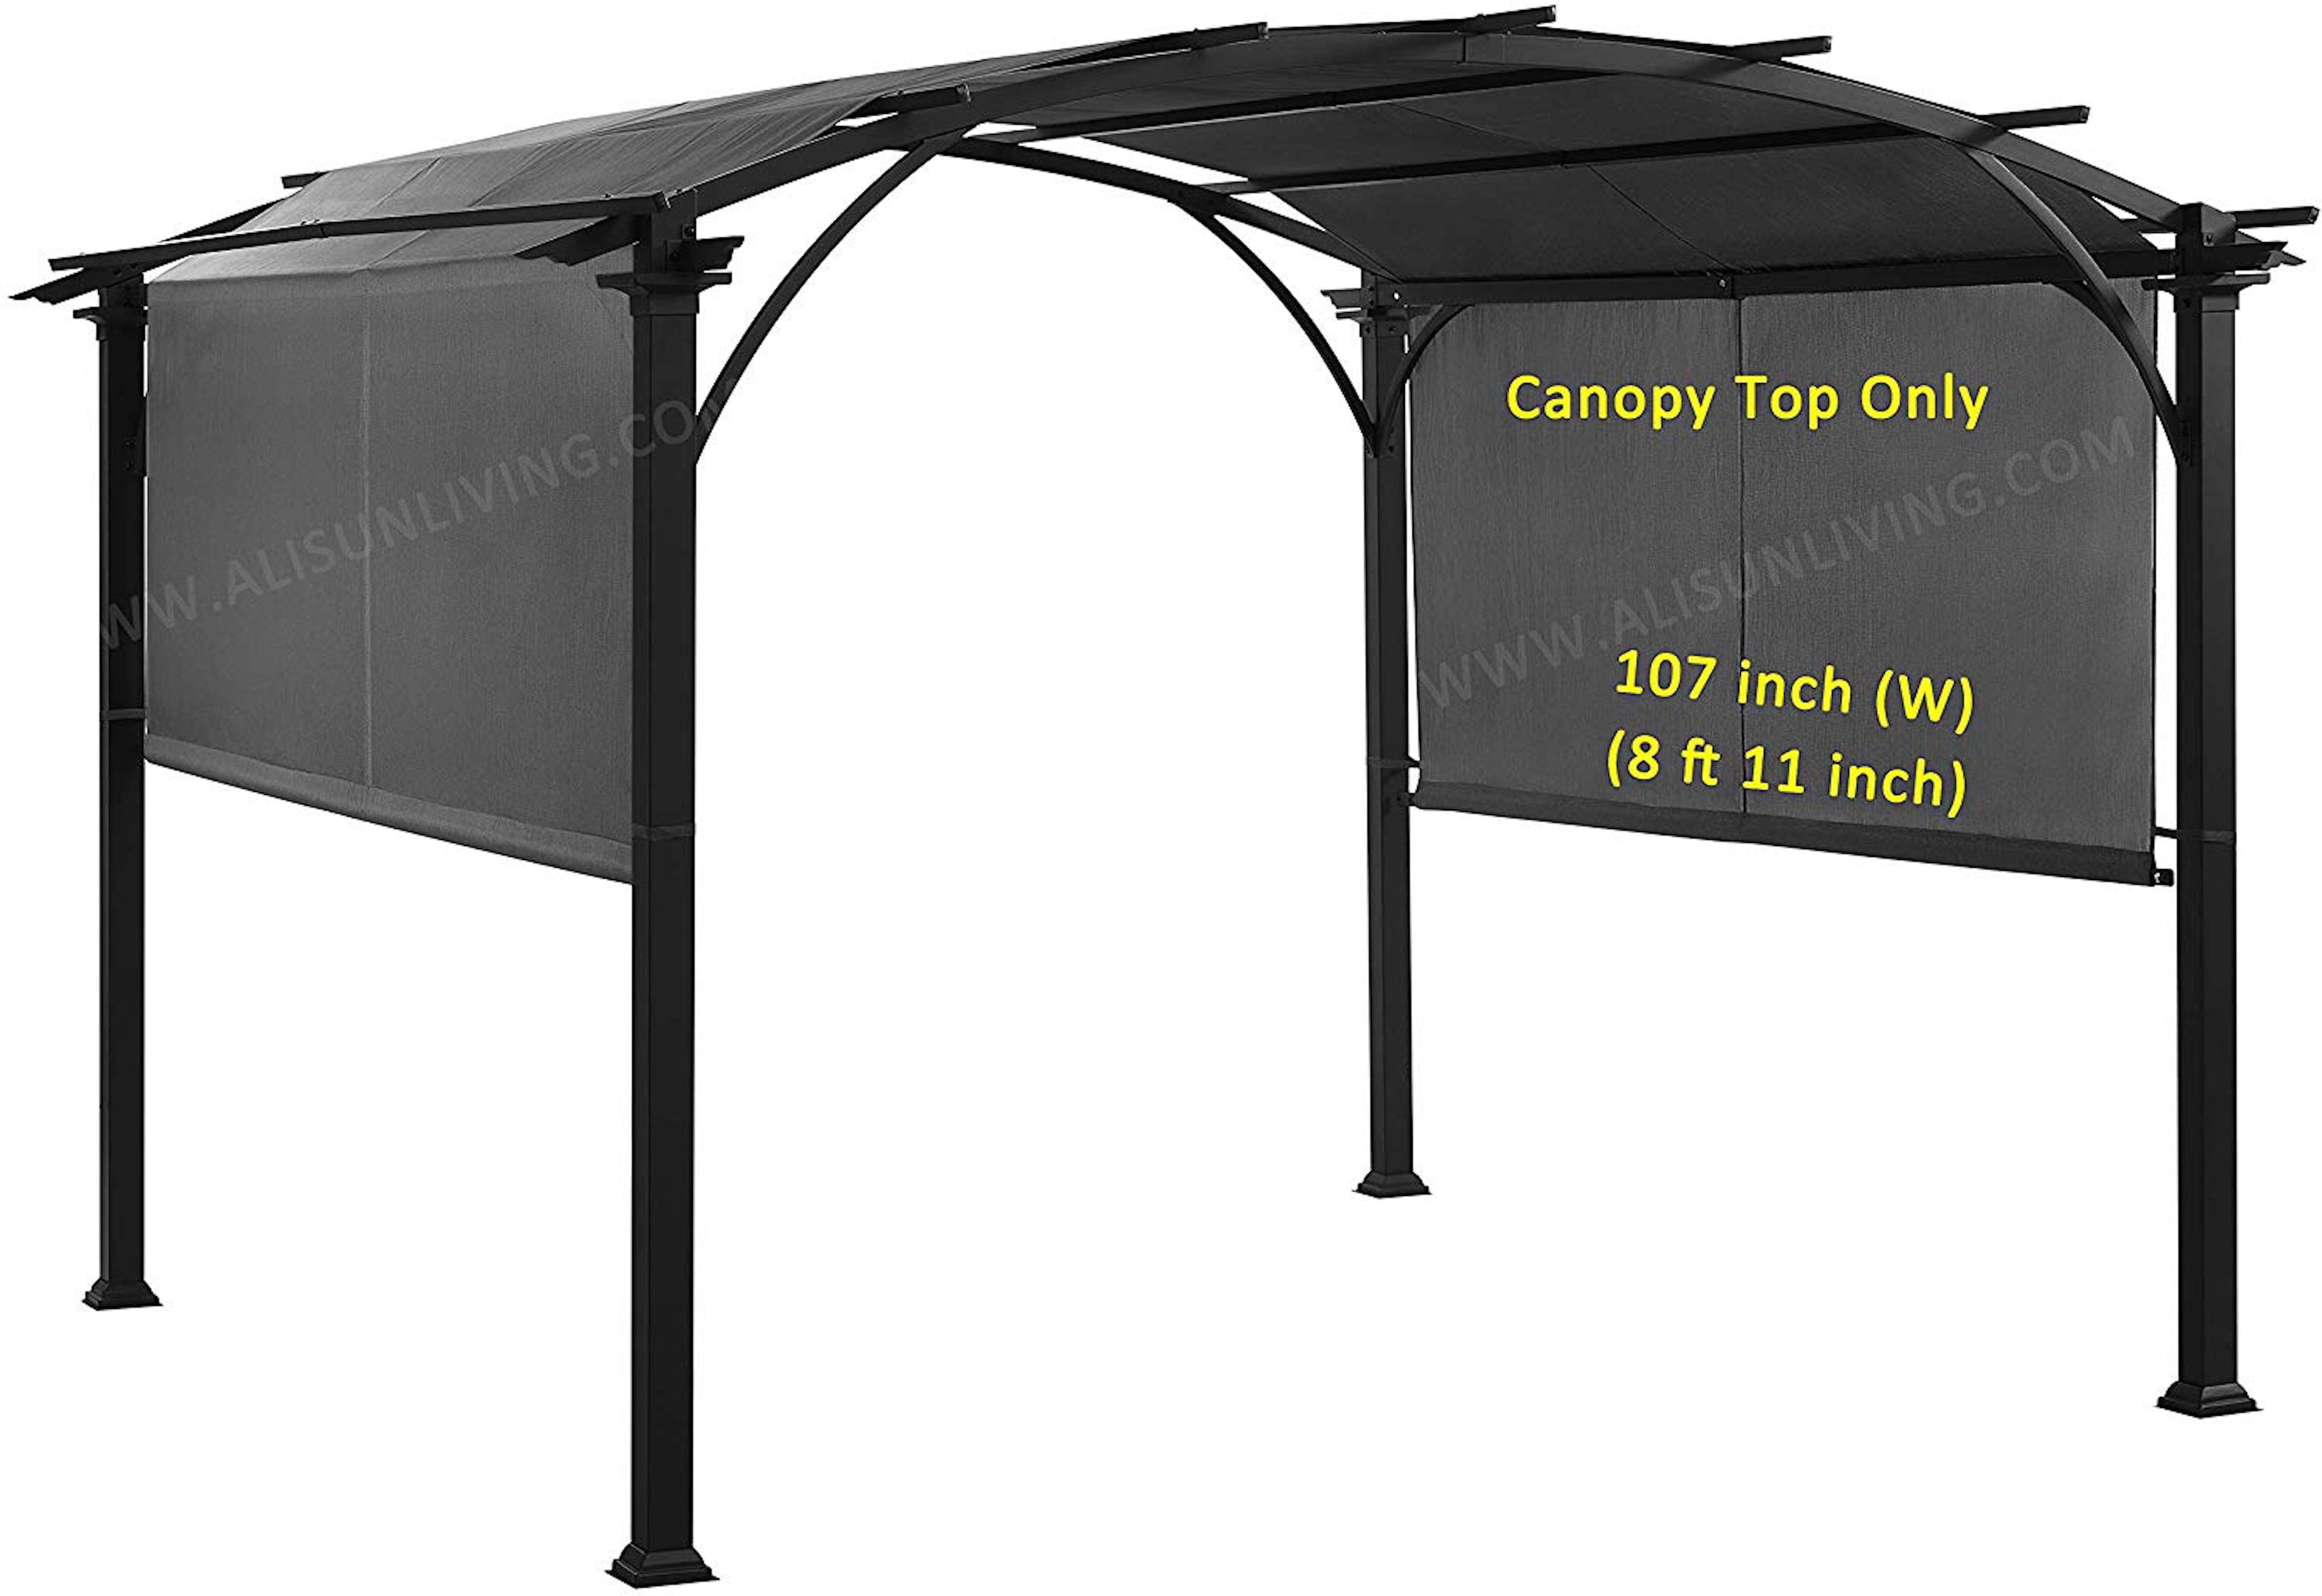  Sling  Canopy  with Ties for The Lowe s Garden Treasures 